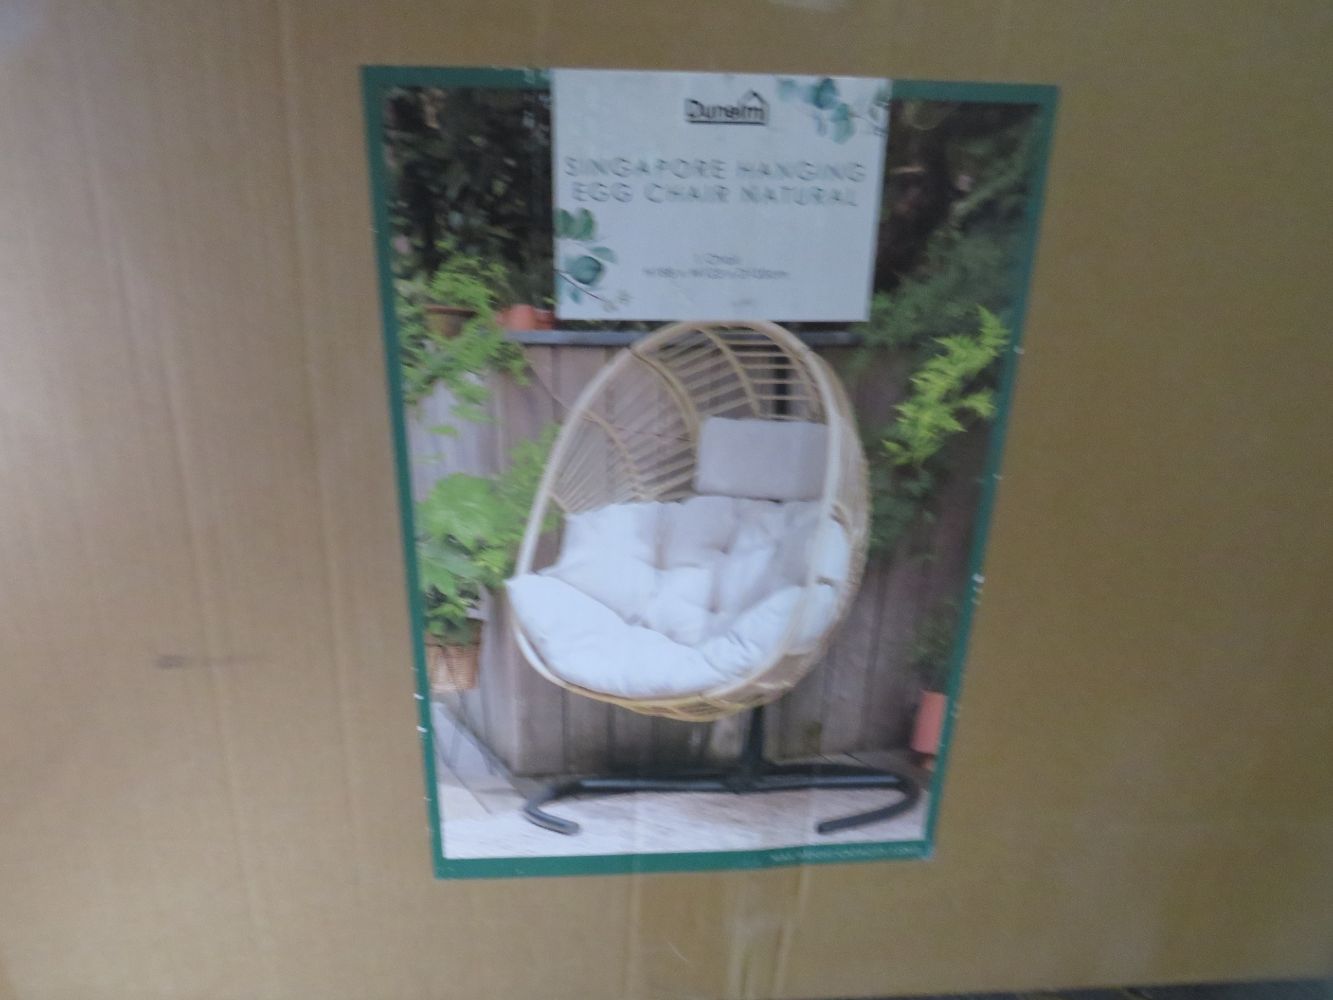 Dunelm summer special, Hanging egg chairs, Bistro sets, Outdoor storage boxes & More!!